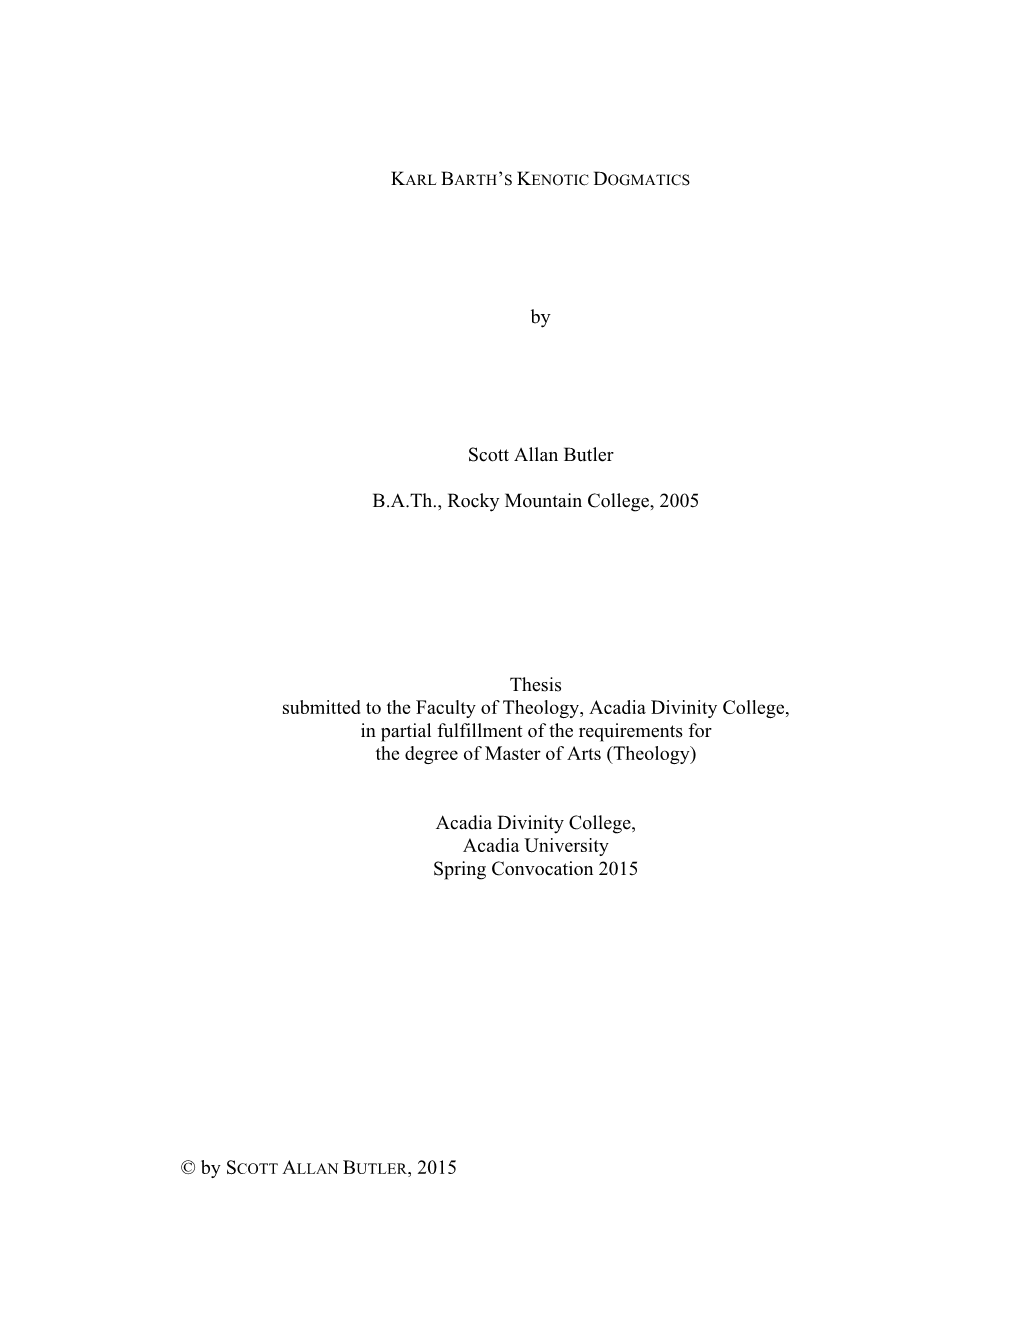 By Scott Allan Butler B.A.Th., Rocky Mountain College, 2005 Thesis Submitted to the Faculty of Theology, Acadia Divinity College